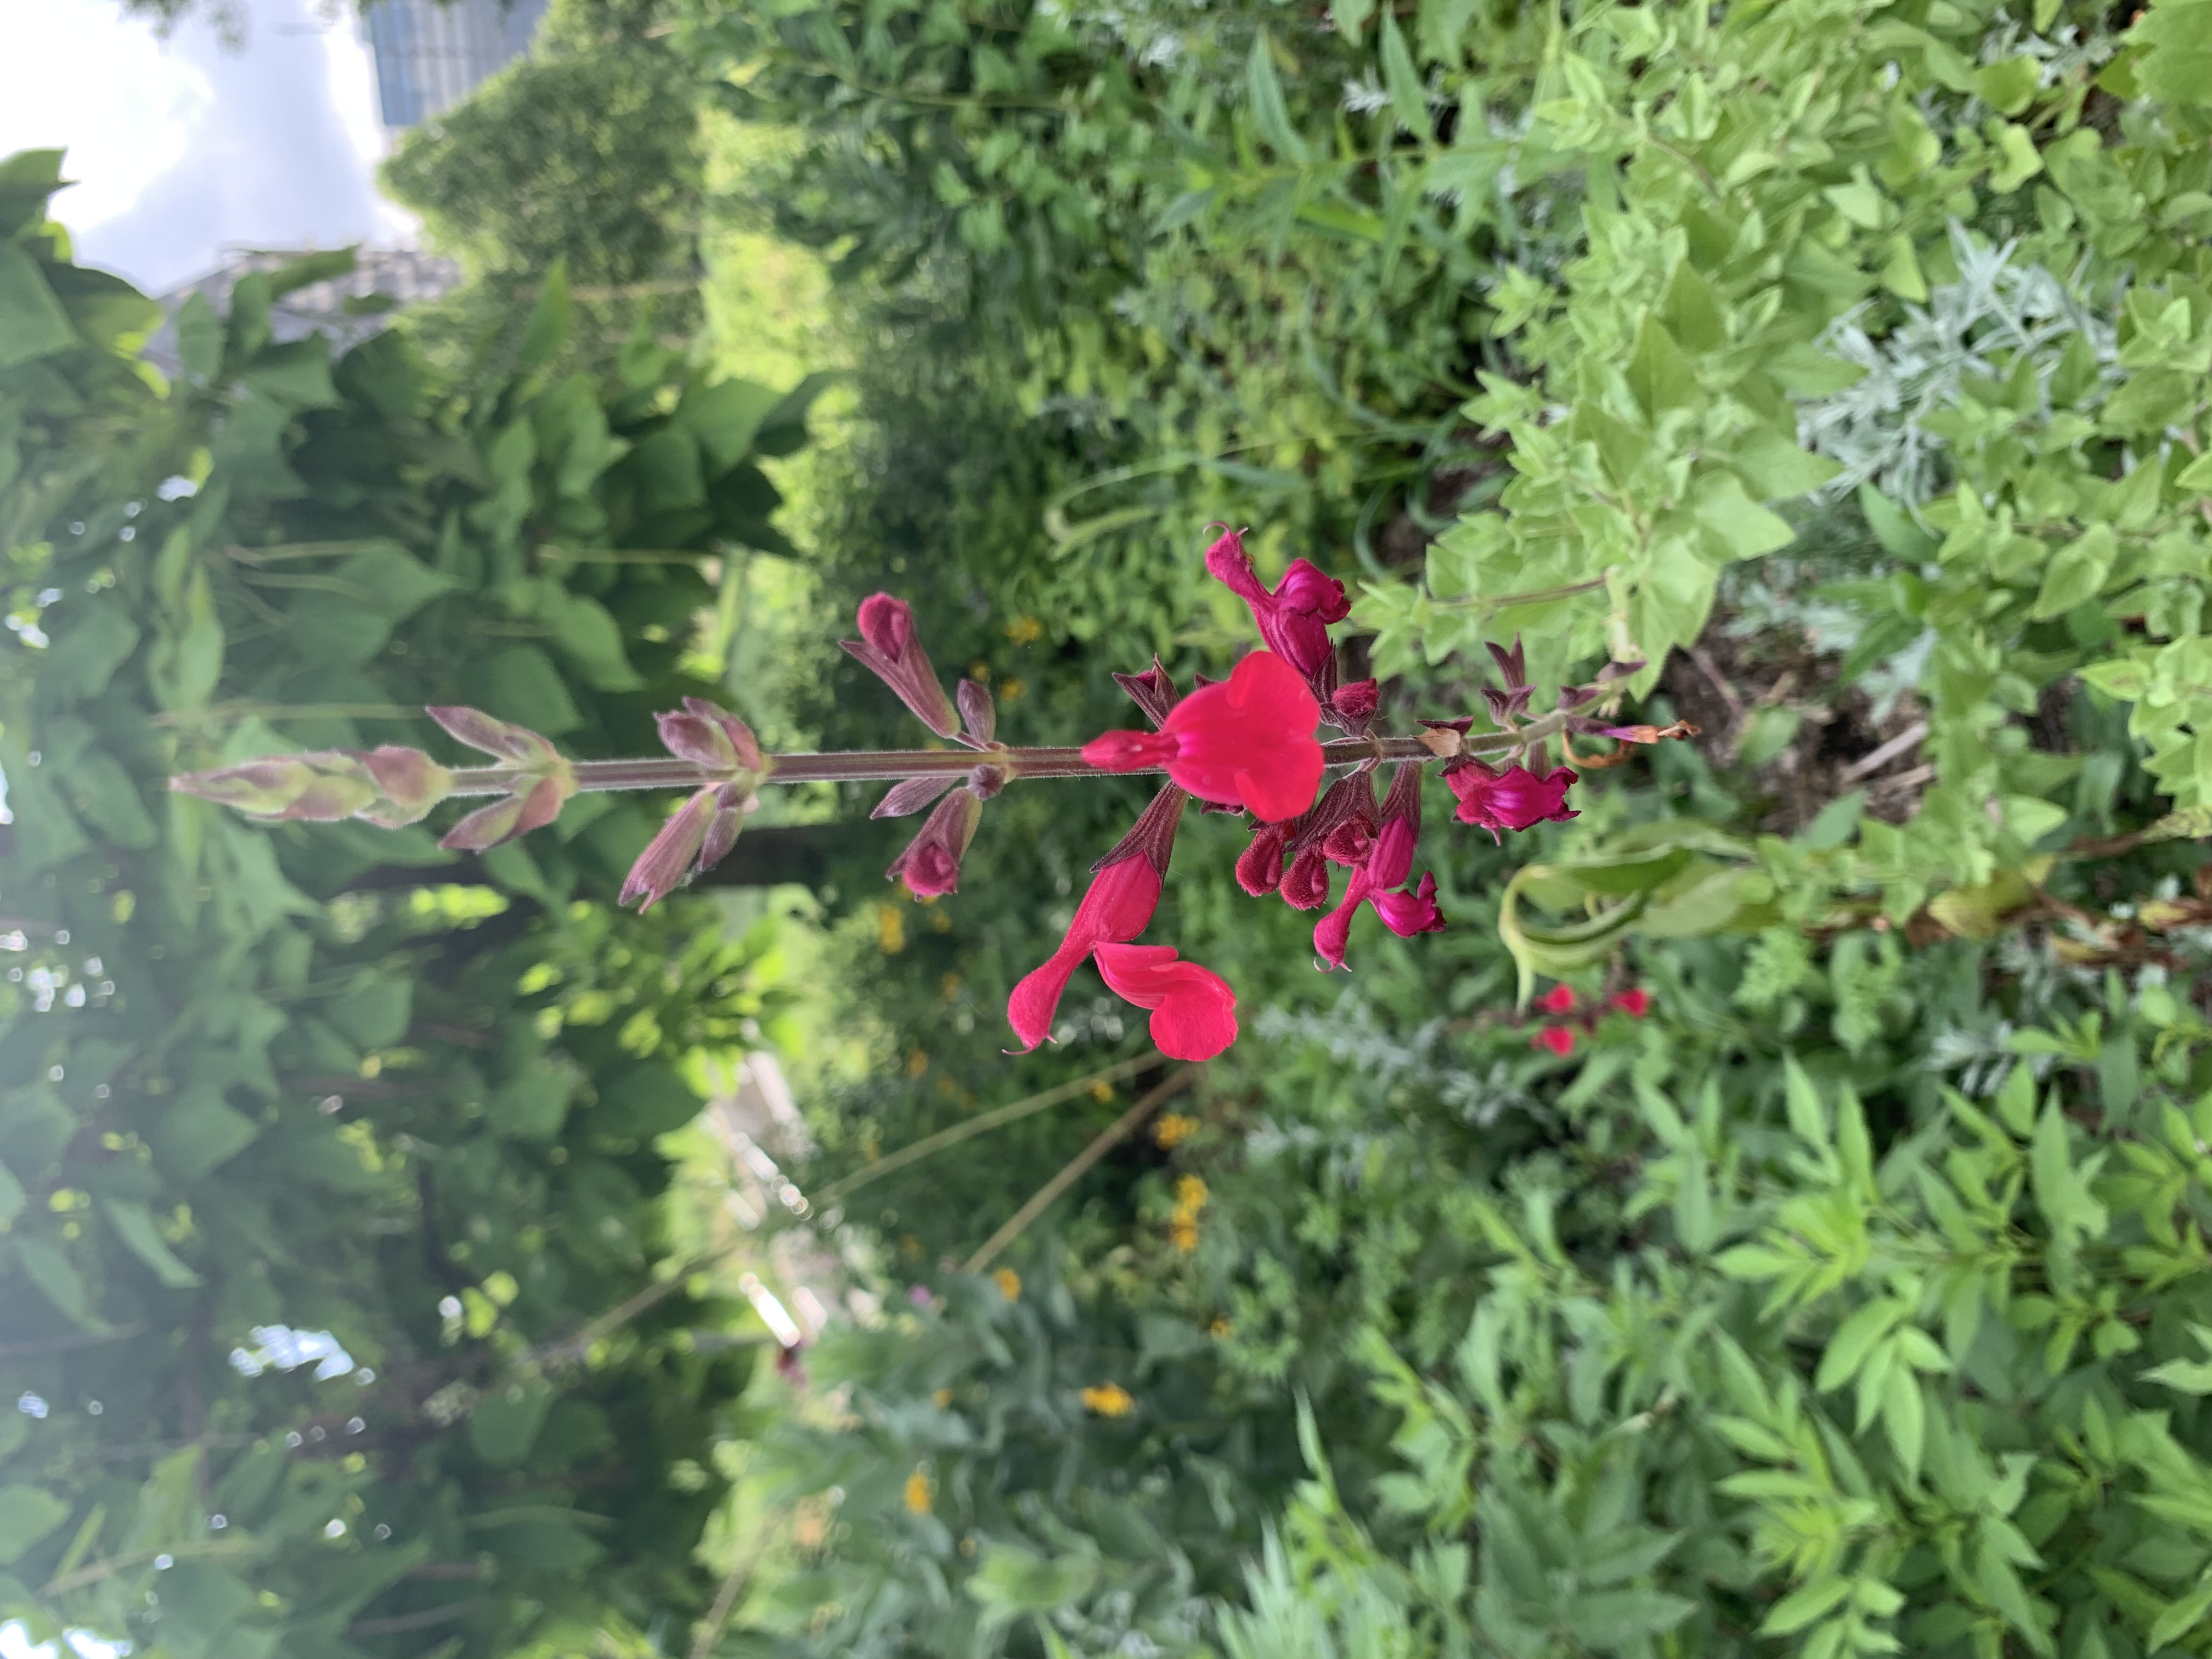 Several red flowers arranged on a vertical stalk.